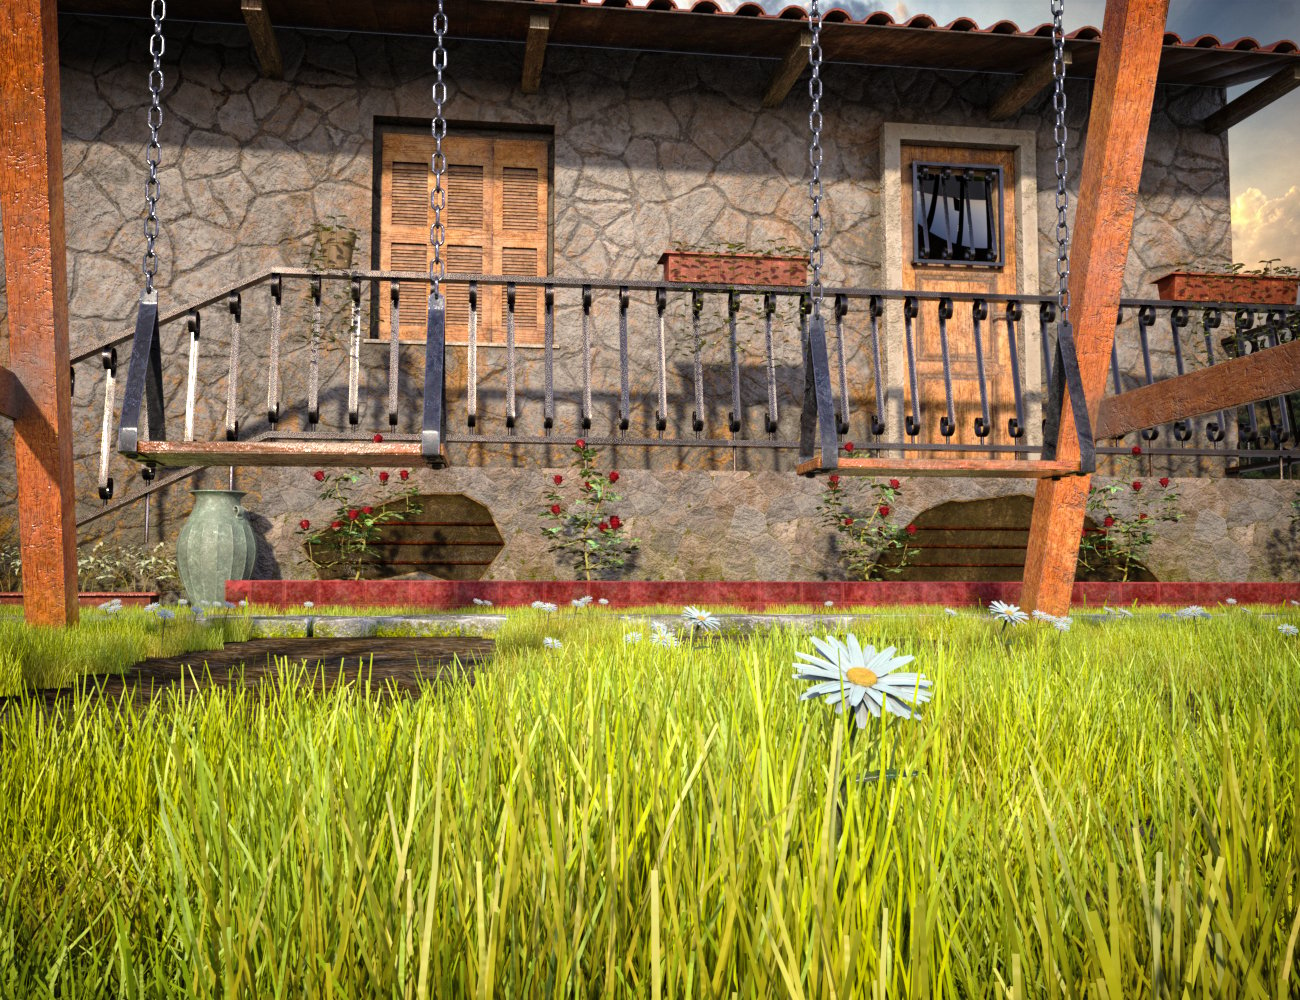 MD Backyard's Swing by: MikeD, 3D Models by Daz 3D